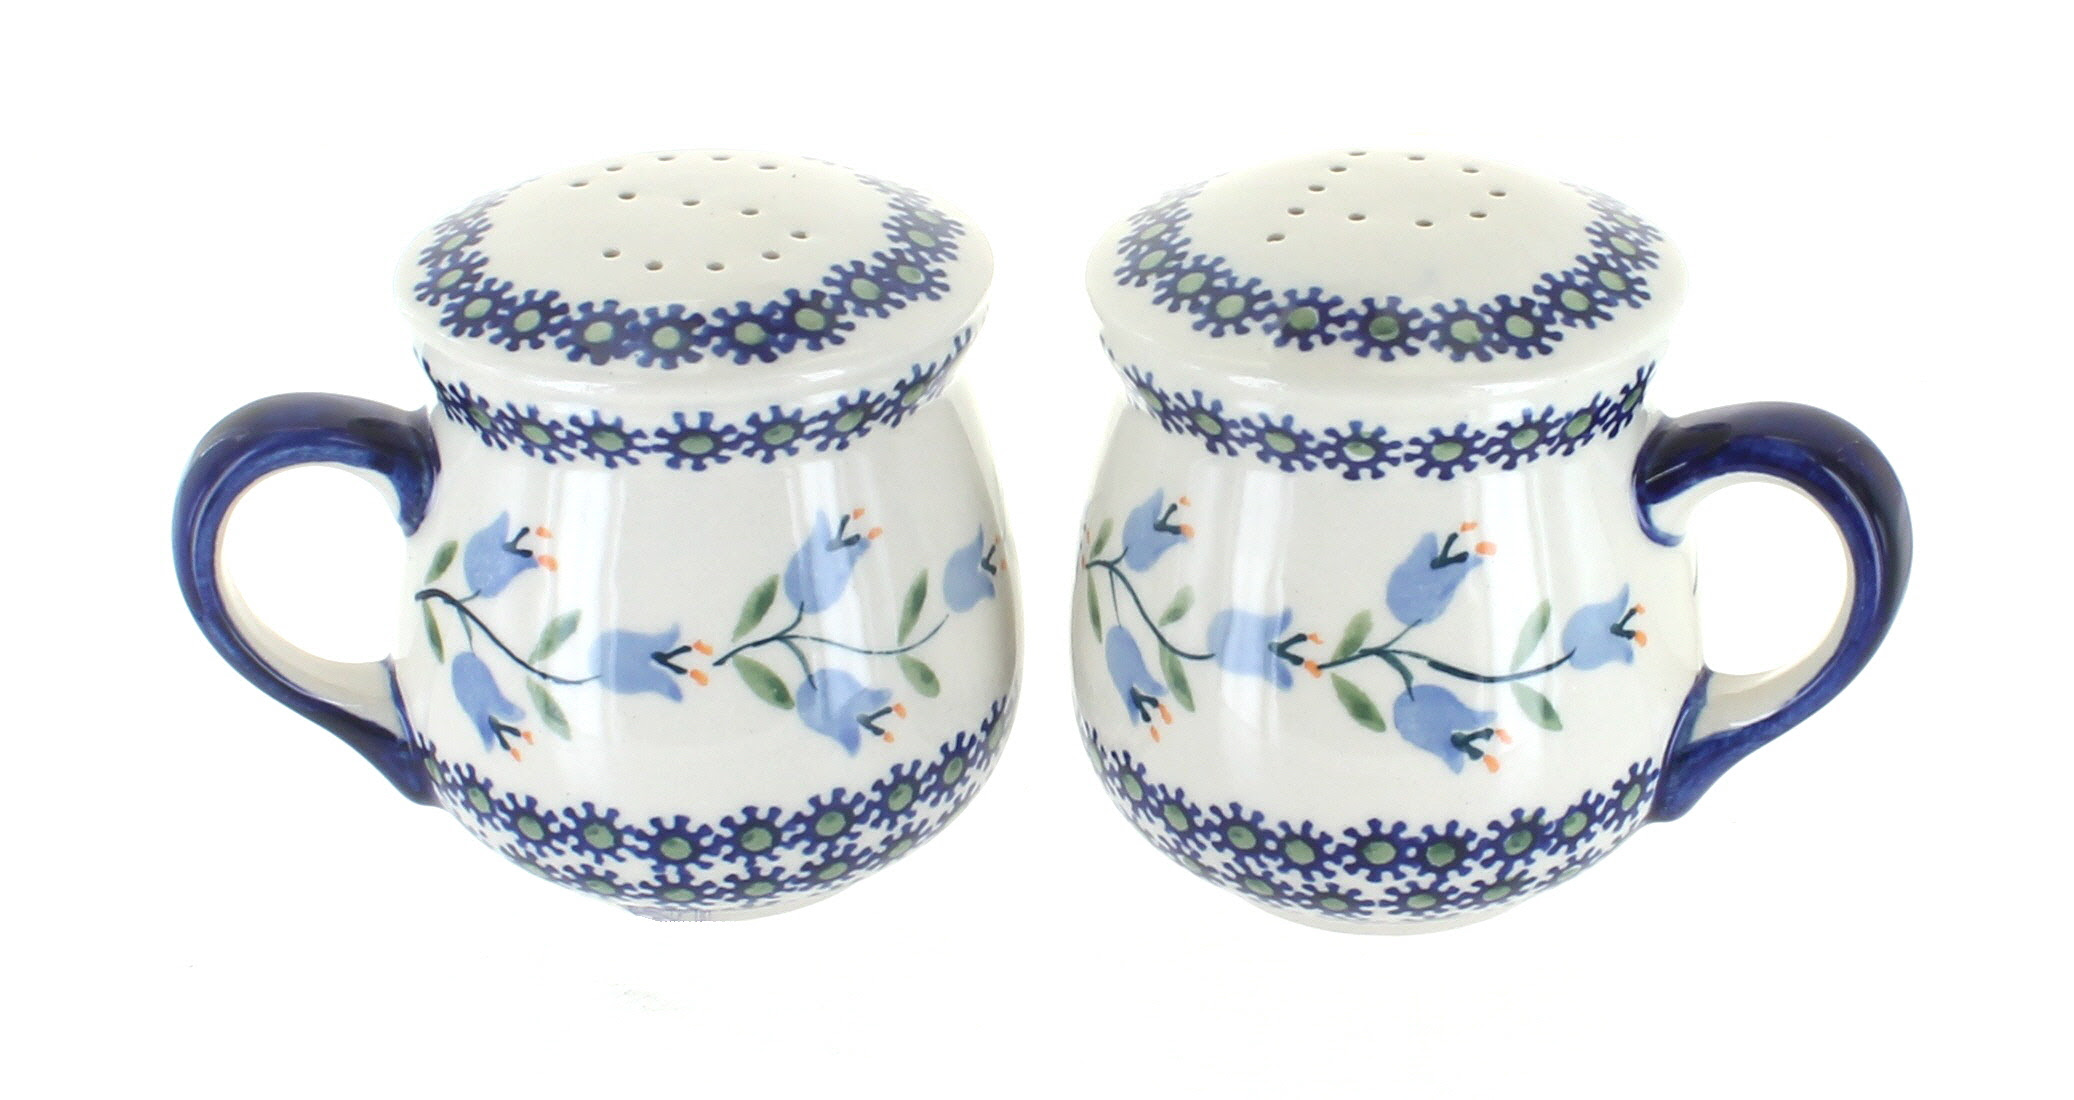 Blue Rose Polish Pottery Tulip Salt Pepper Shakers With Handles